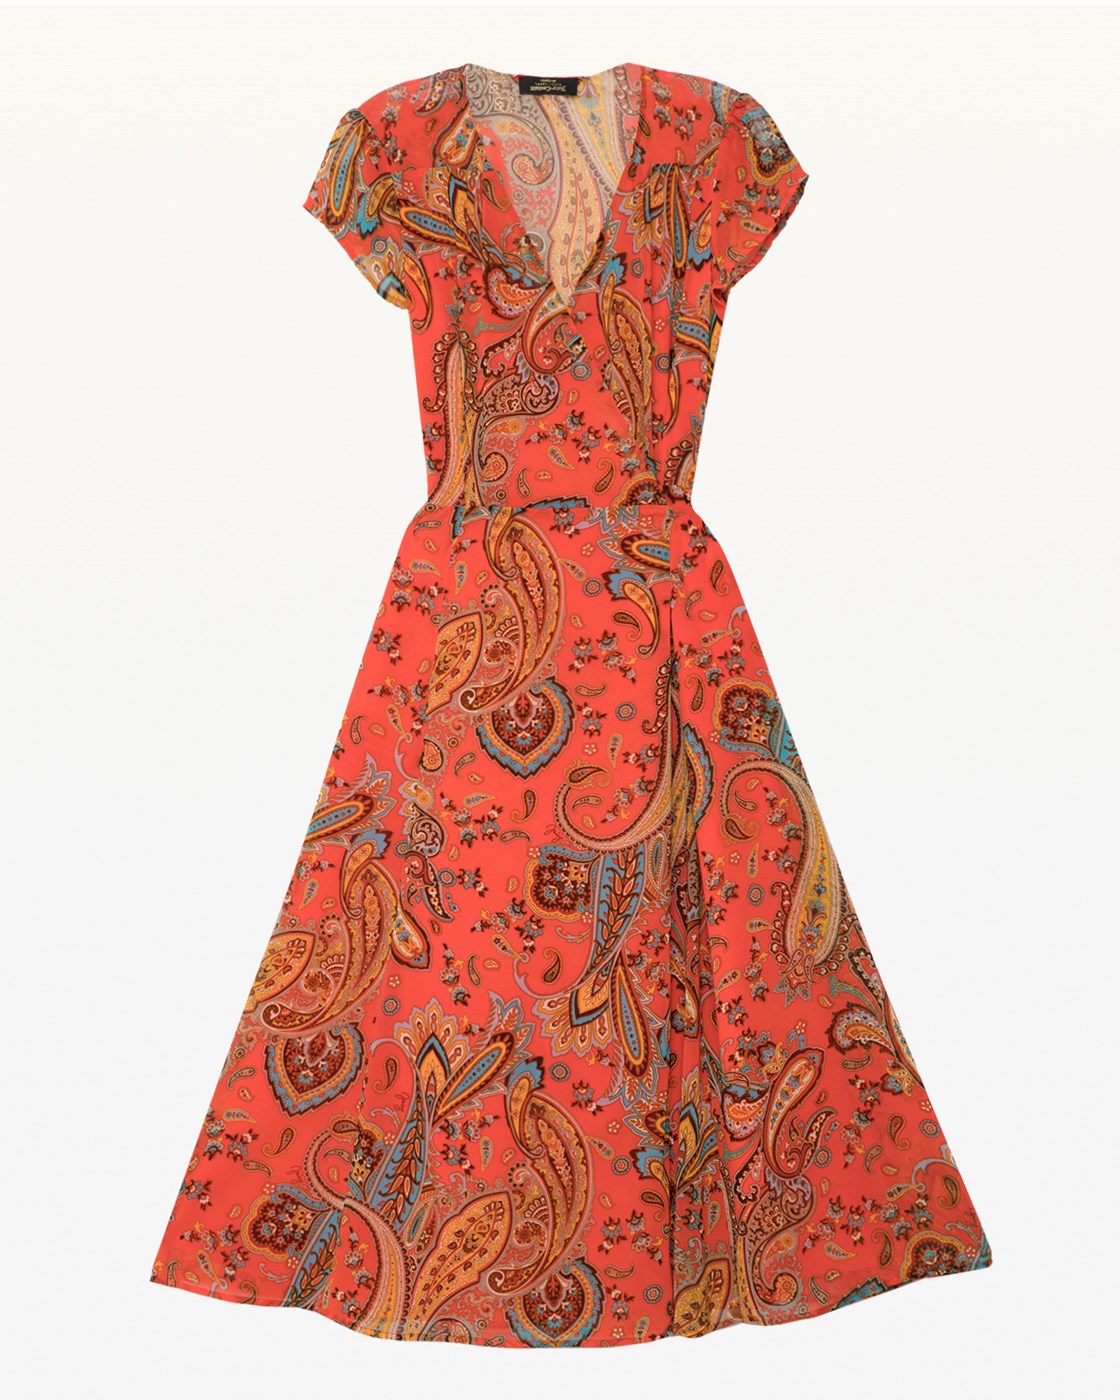 Juicy Couture Rustic Paisley Wrap Dress